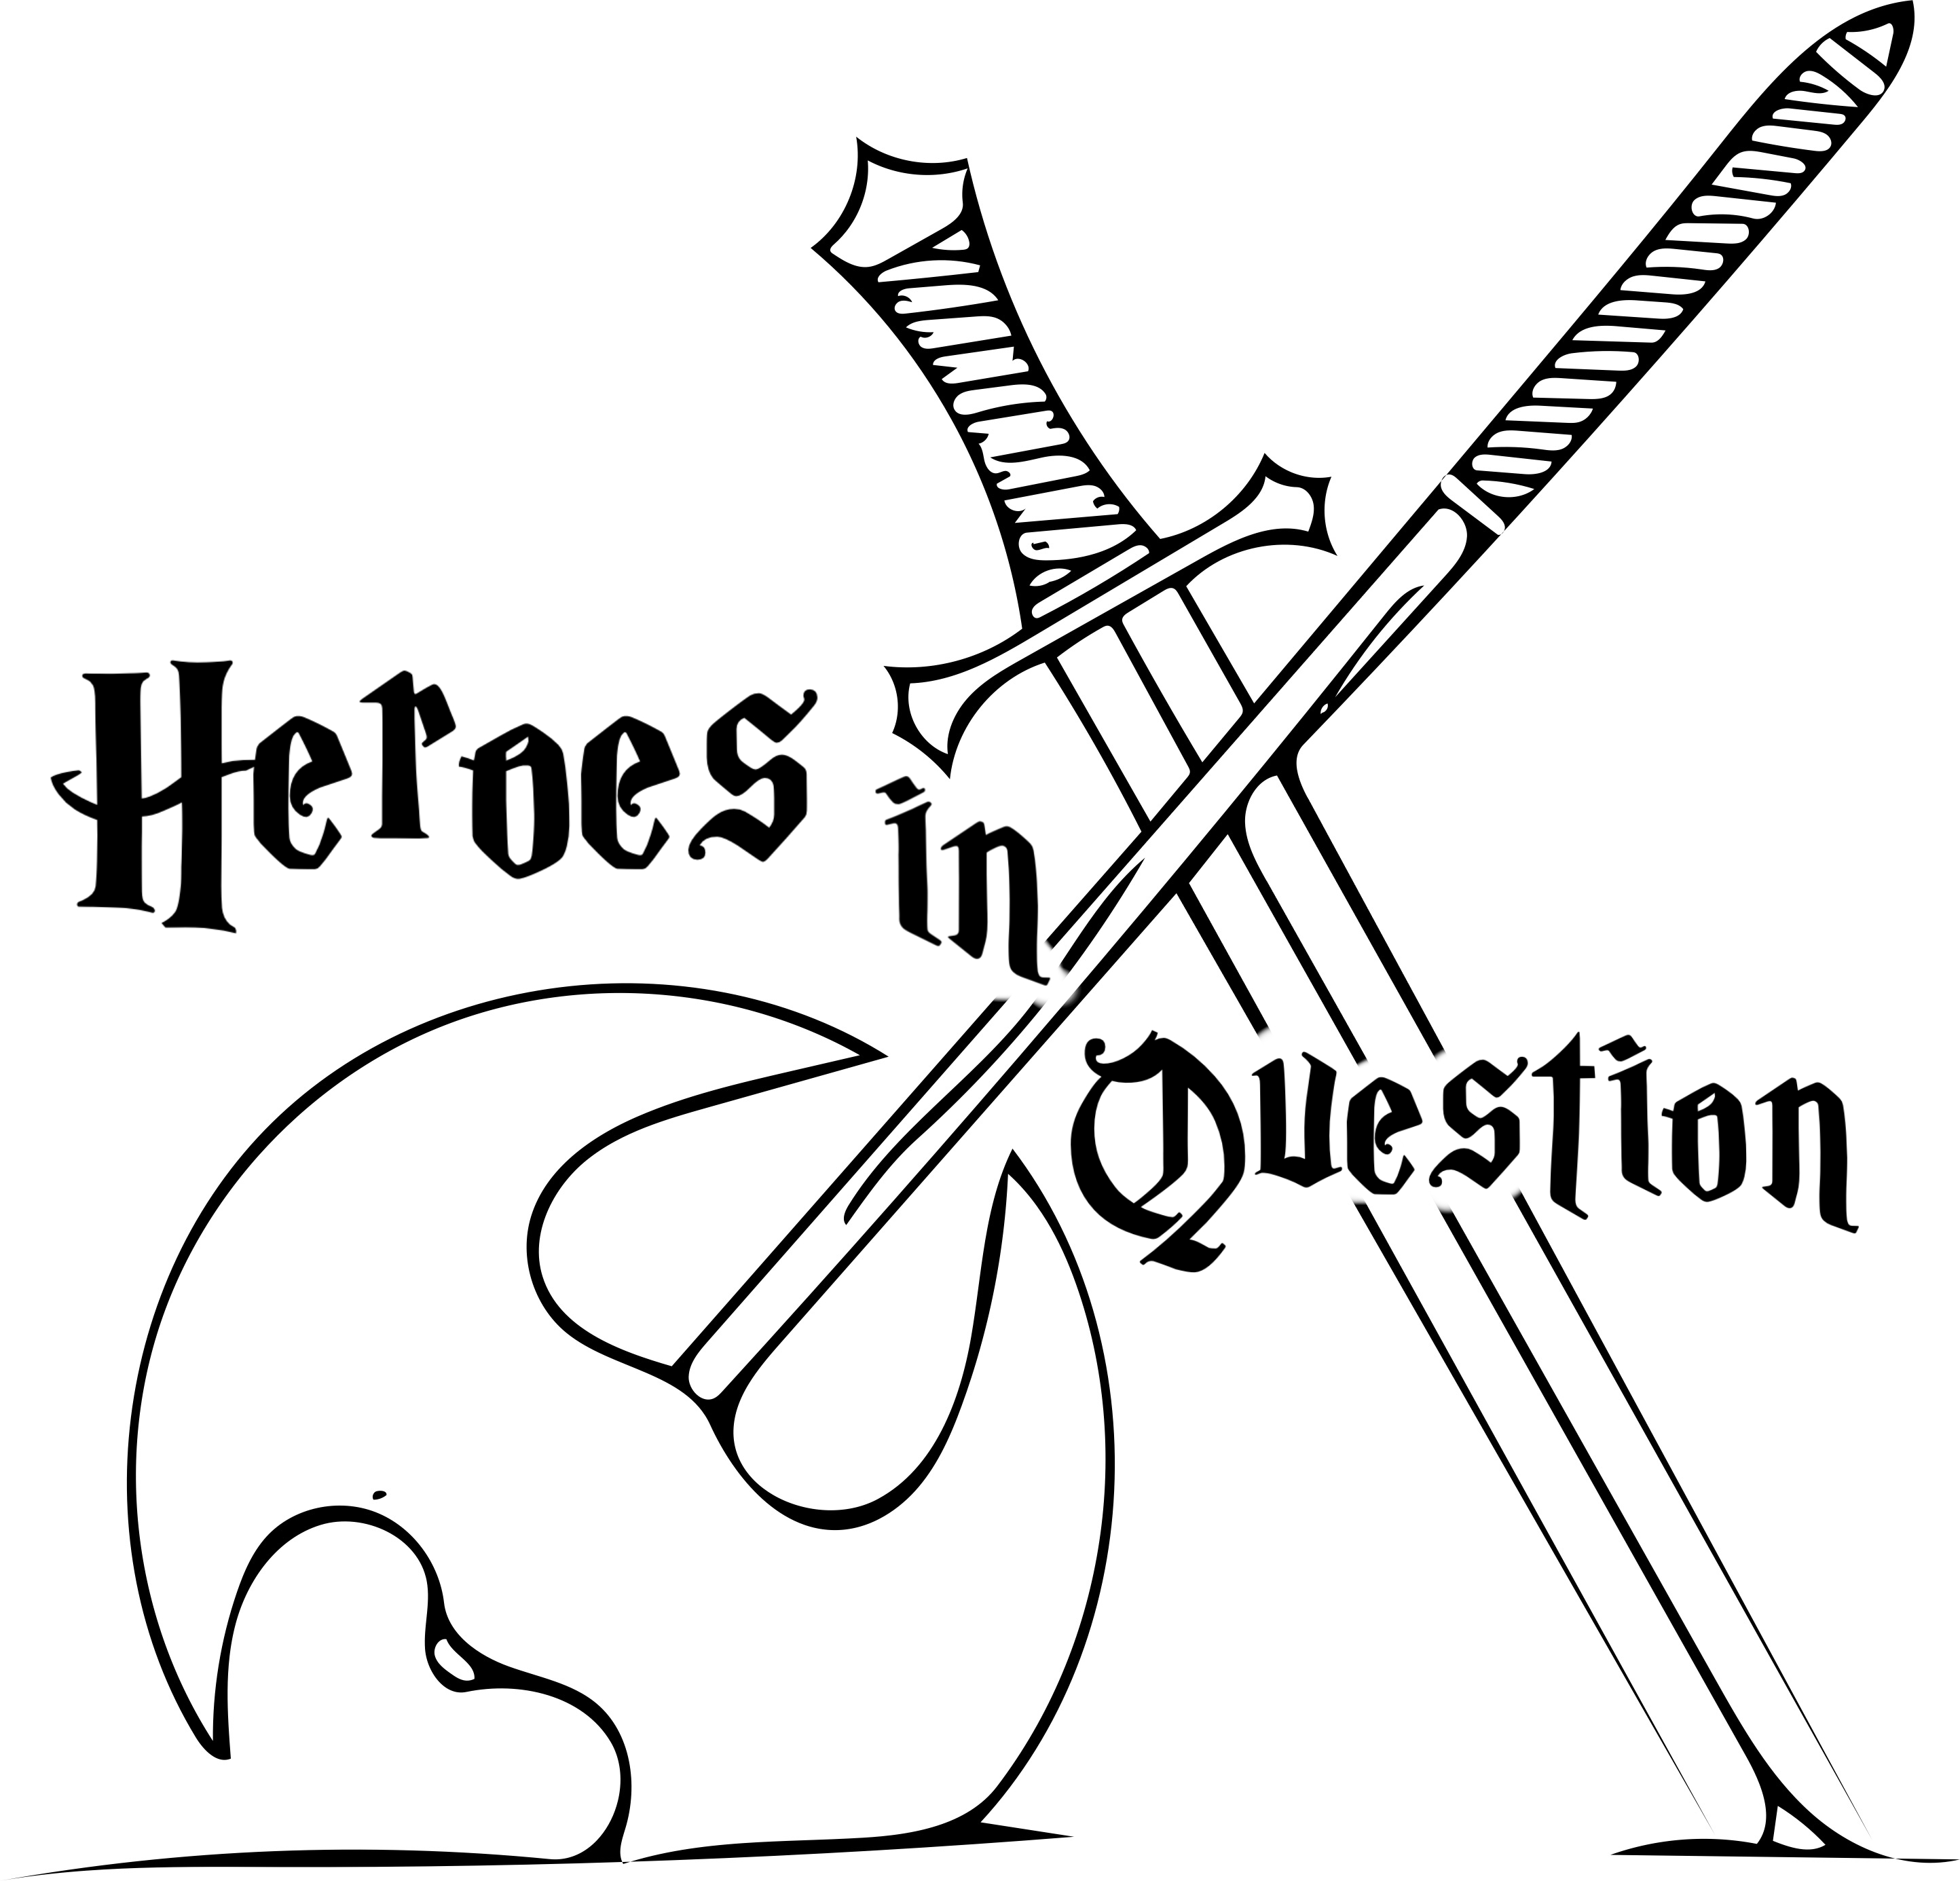 Heroes in Question